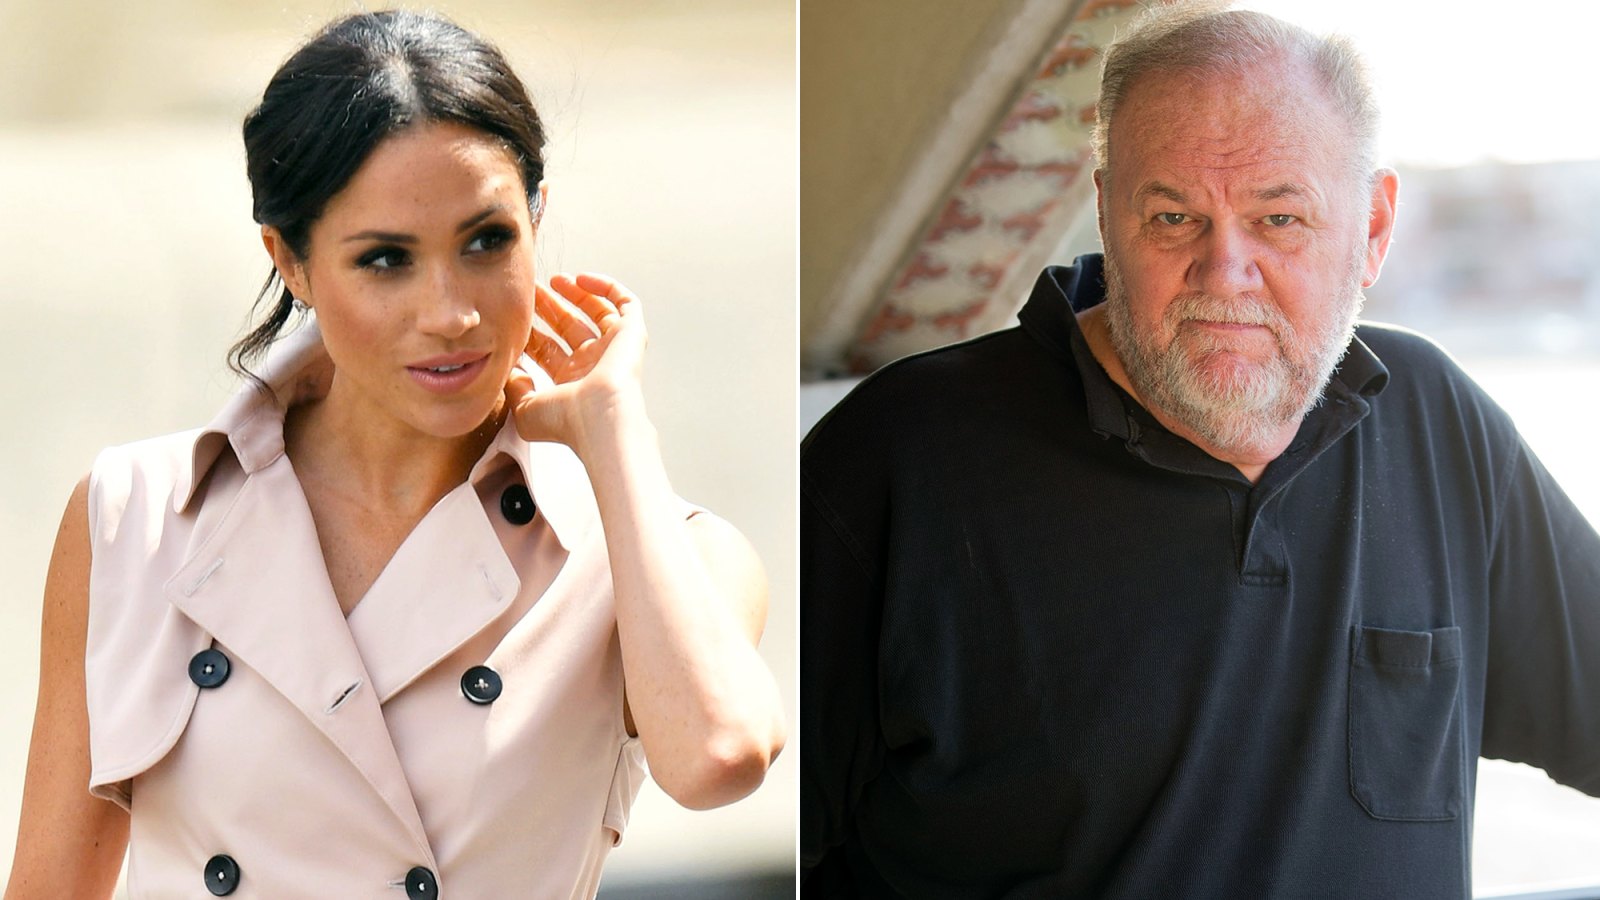 Duchess Meghan Has ‘Anxiety’ About Her Father Thomas Markle: ‘She’s Wondering If This Will Go on Forever’